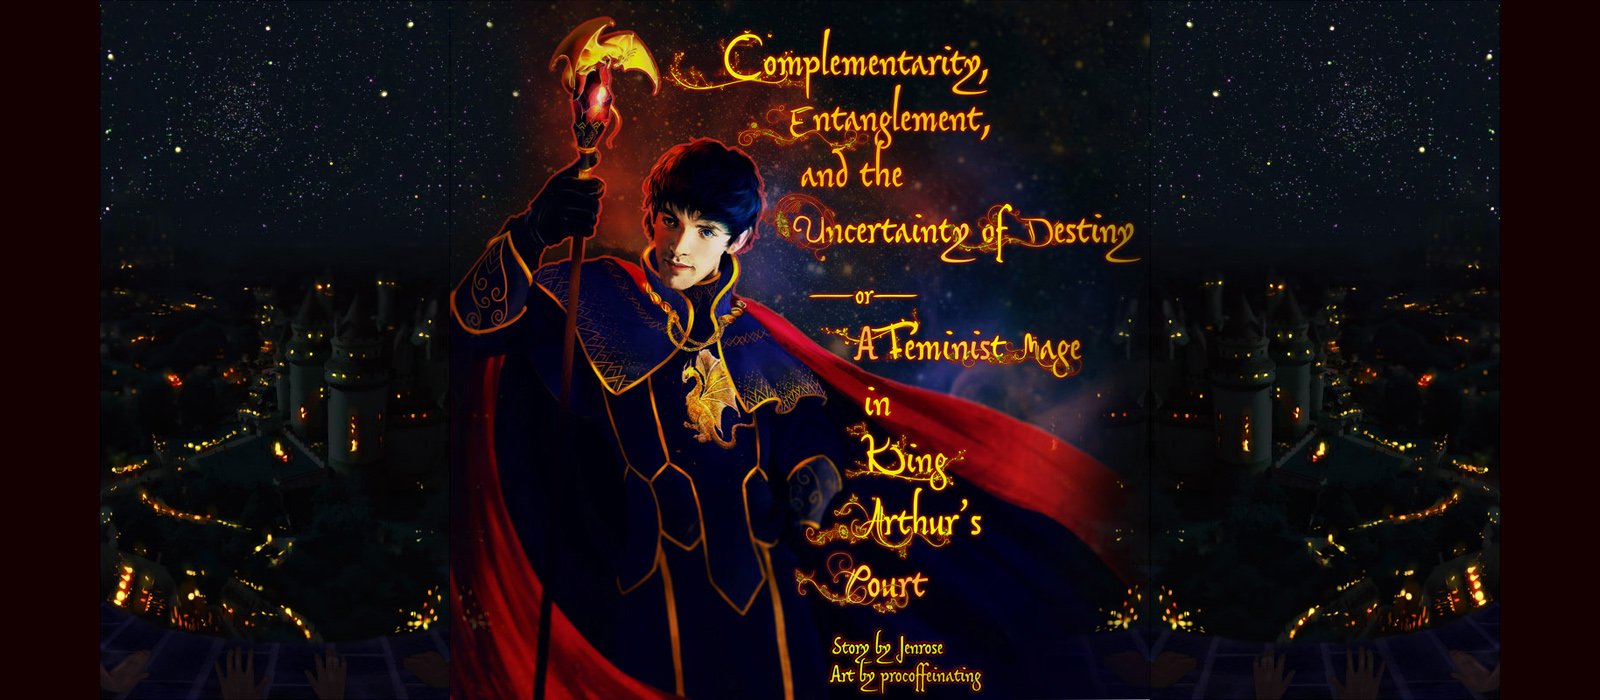 A powerful Merlin stands in fine garb, with the Pendragon dragon on his deep blue velvet coat. A flowing red cape swirls around him, and in his hand is a glowing staff with a red gem and a gold dragon on top. The title of the fanfic is rendered in a variety of ornate fonts, with leaves and flowers and feathers growing out from the text. The text is shimmering gold and well-coordinated to the trim of Merlin's clothes. To the sides, we see Camelot at night, laid out behind him, as seen from high above, looking down from a tower. The background is very dark, with the starry sky blending almost imperceptibly with the festival lights of Camelot at night. 